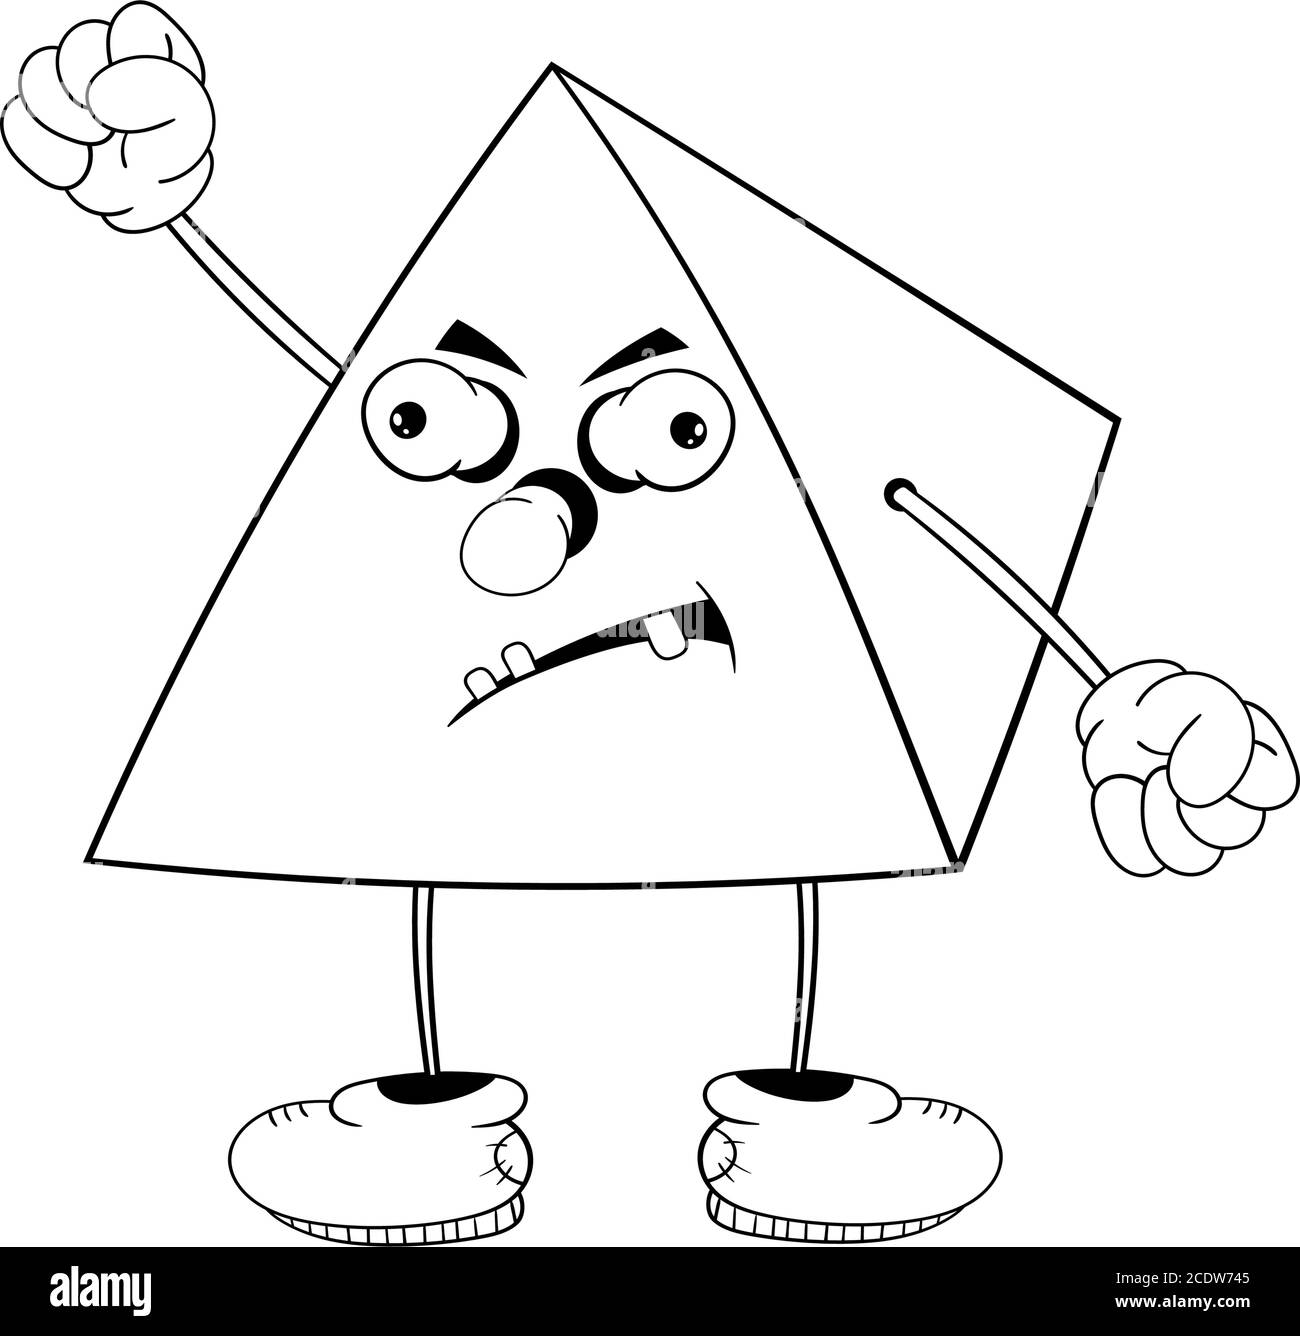 Funny cartoon pyramid with eyes, arms and legs in shoes is angry and shows a fist. Black and white coloring. Stock Vector